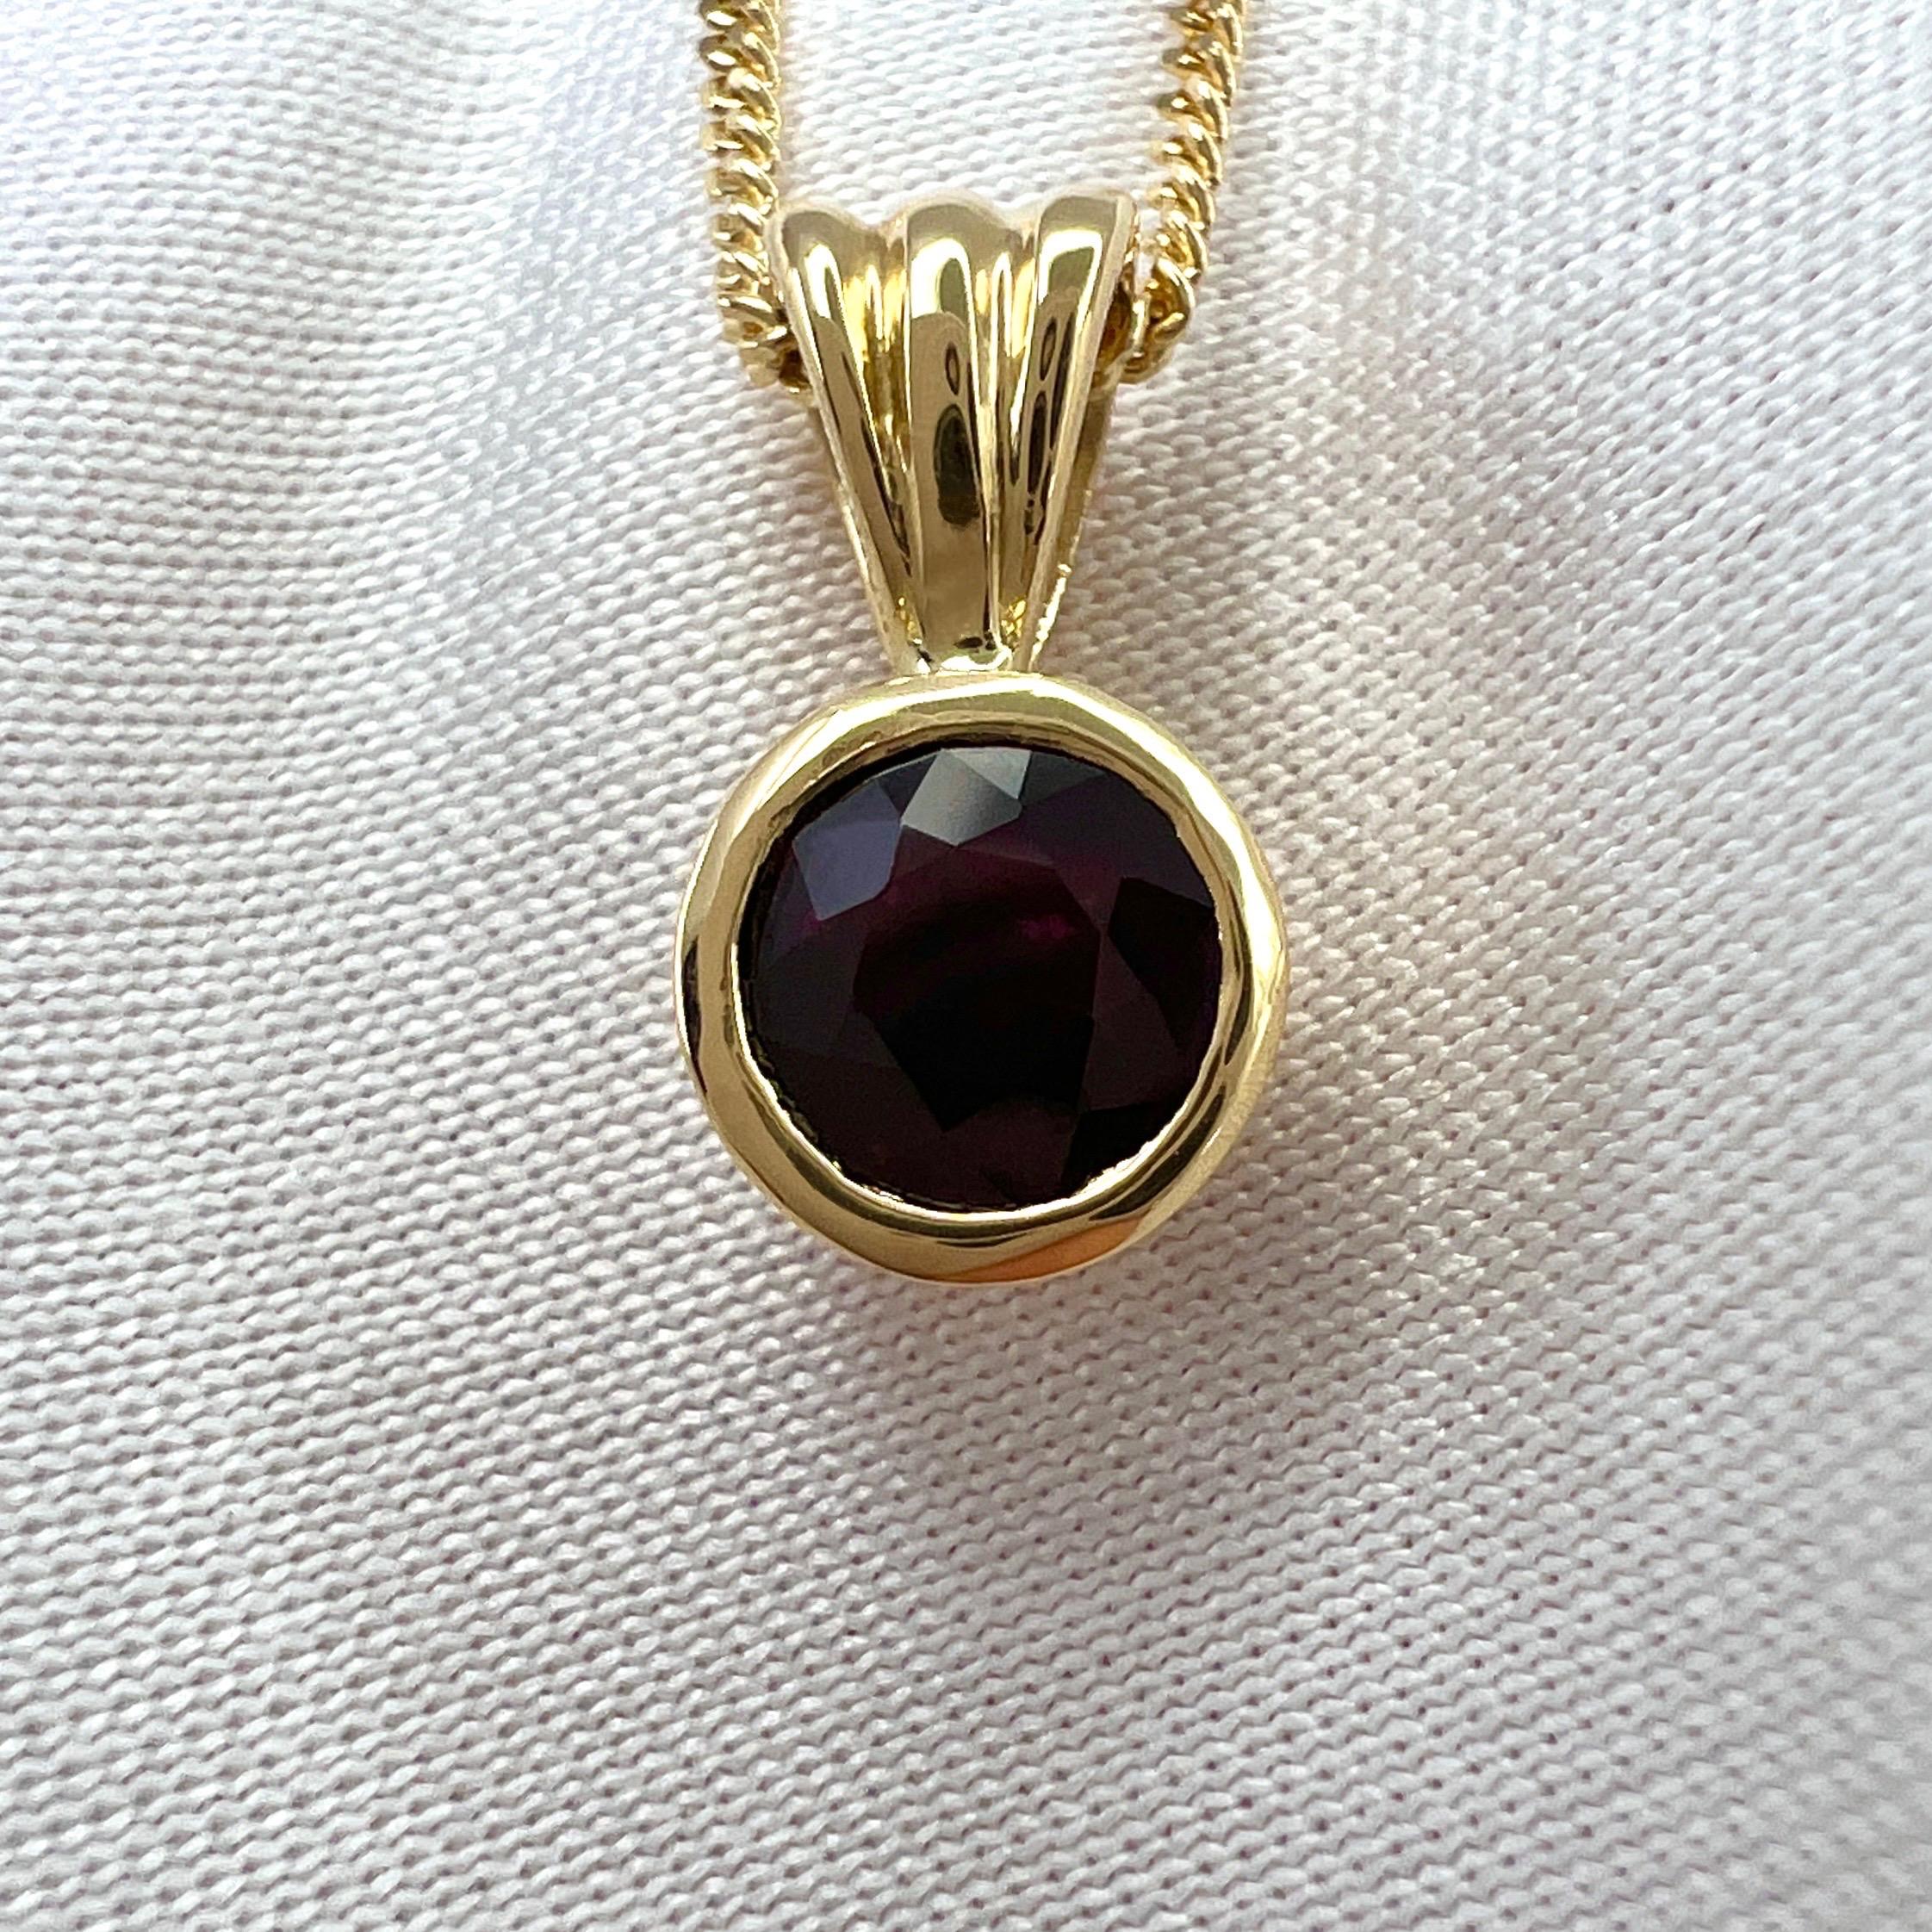 Natural Deep Red Ruby 18k Yellow Gold Solitaire Pendant Necklace.

Stunning 0.51 carat ruby with a beautiful deep red colour and excellent round cut. Also has good clarity with only some small natural inclusions visible when looking closely. 

The